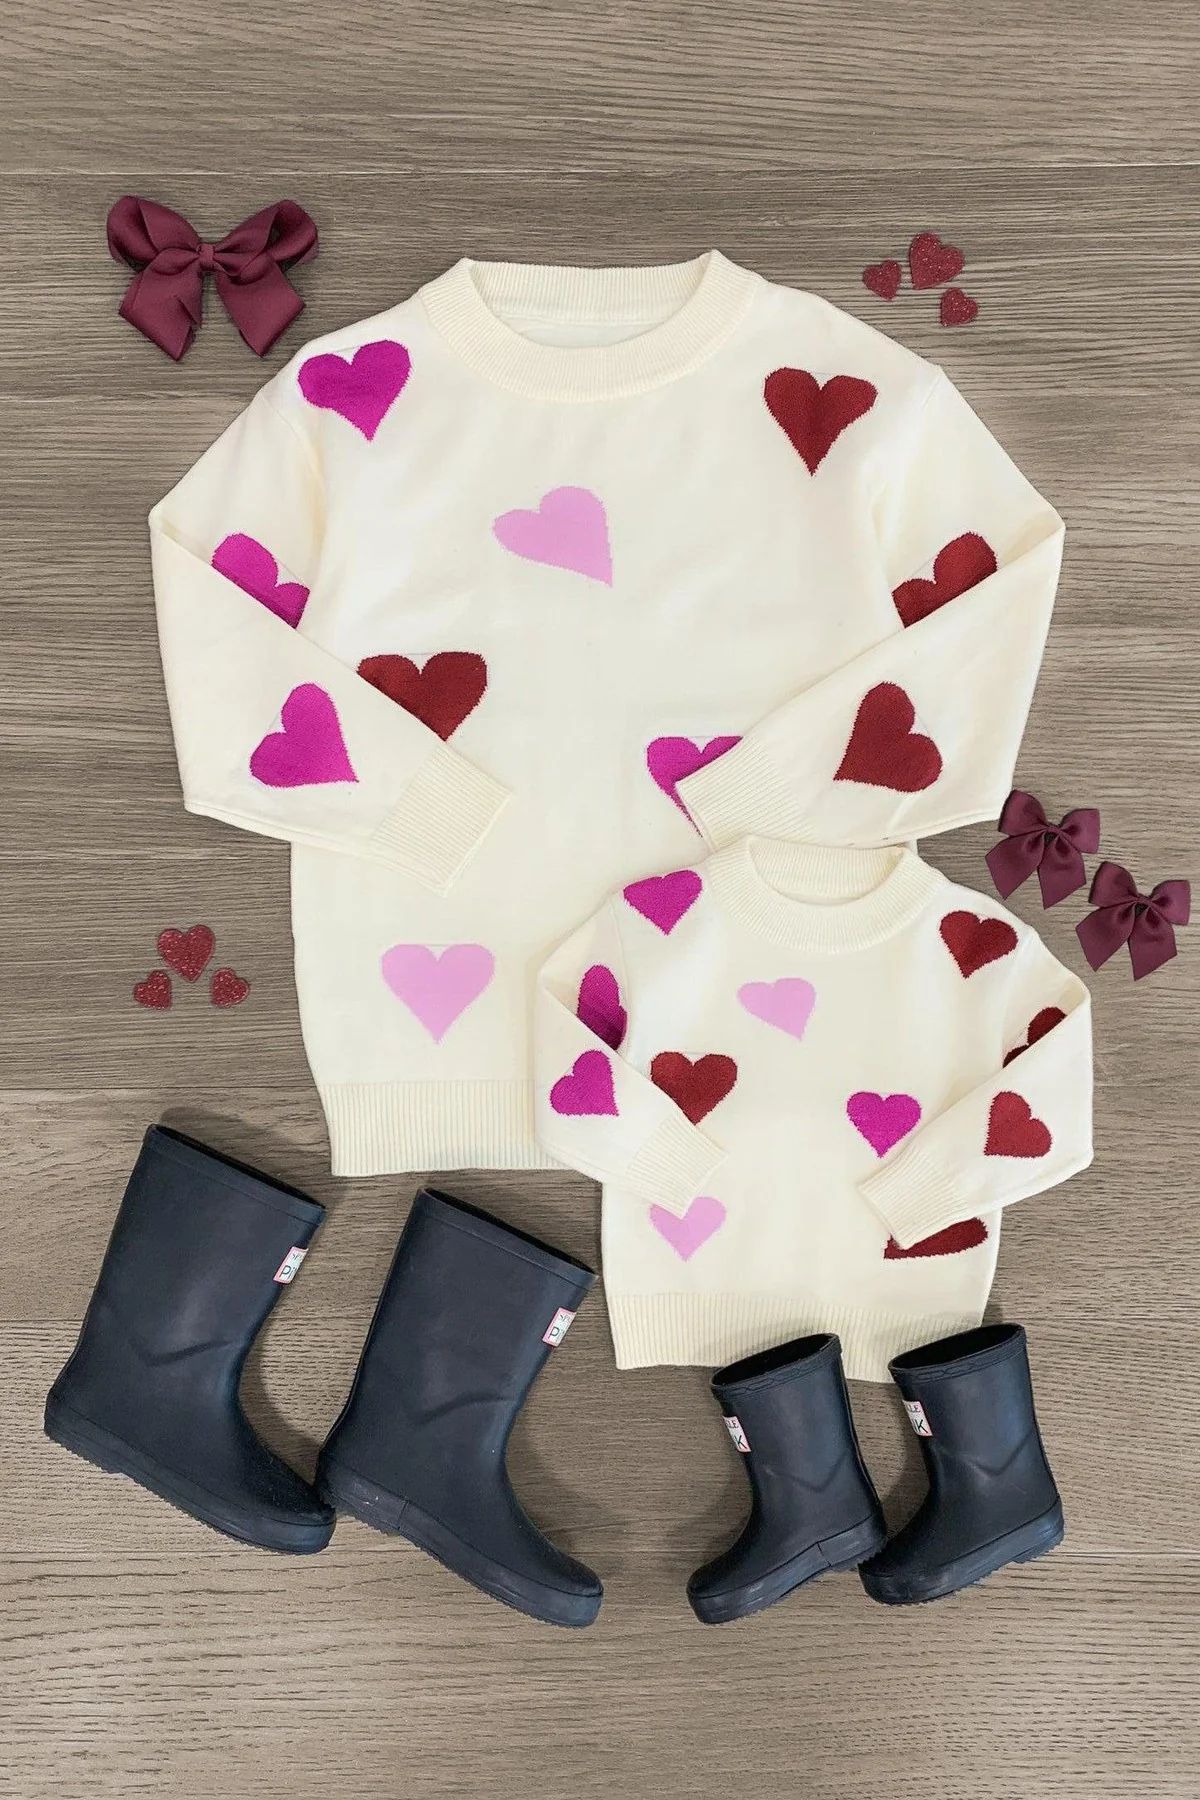 Mom & Me - Cream Heart Sweater | Sparkle In Pink